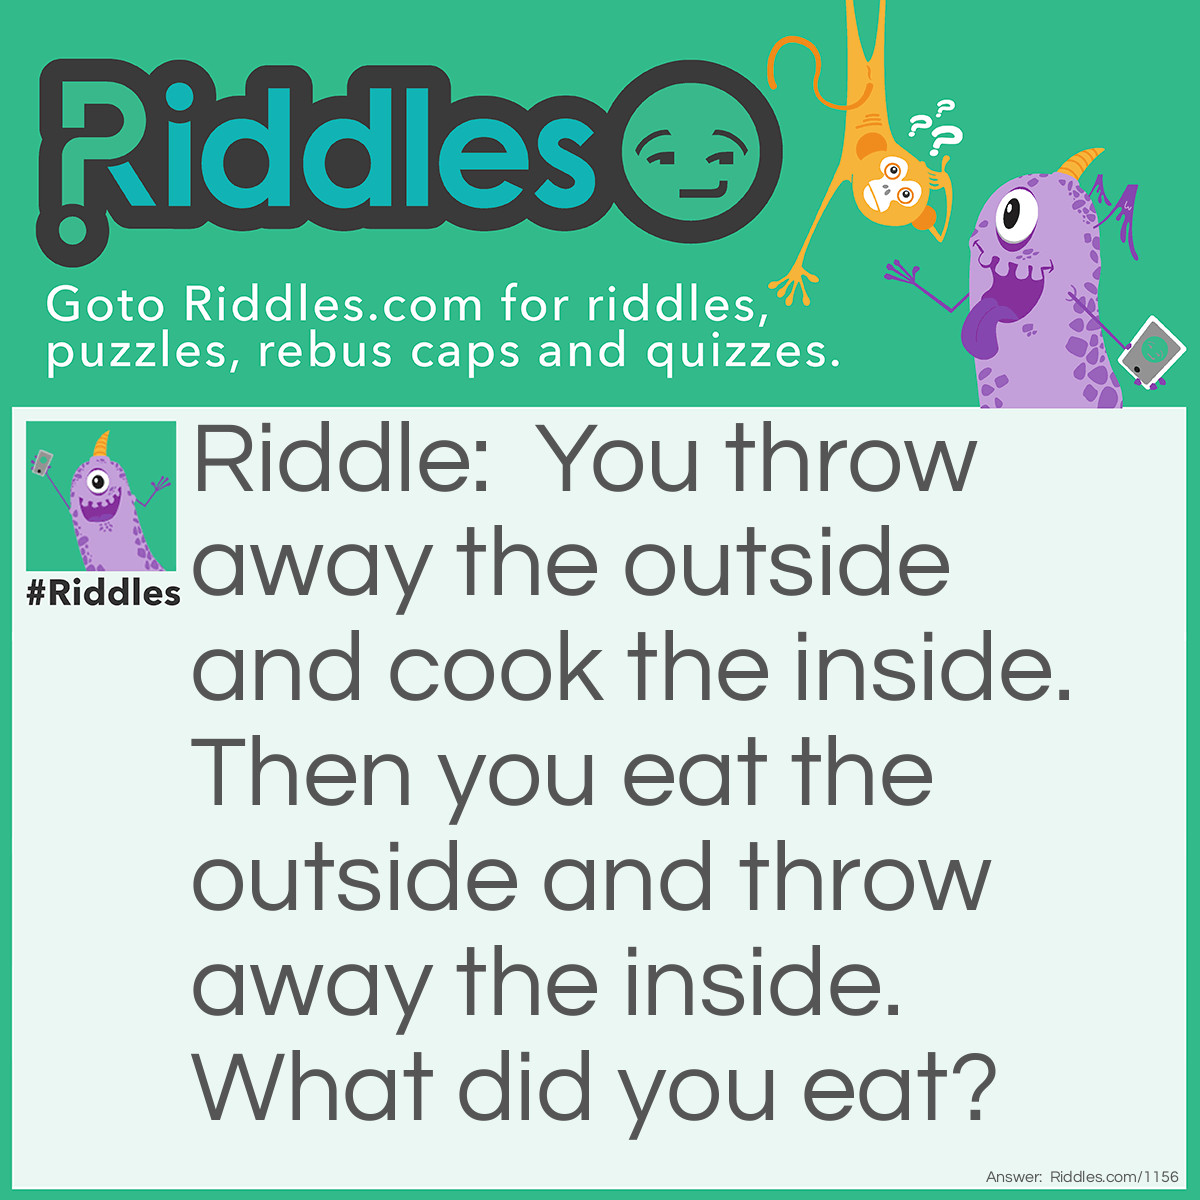 Riddle: You throw away the outside and cook the inside. Then you eat the outside and throw away the inside. 
What did you eat? Answer: Corn on the cob.